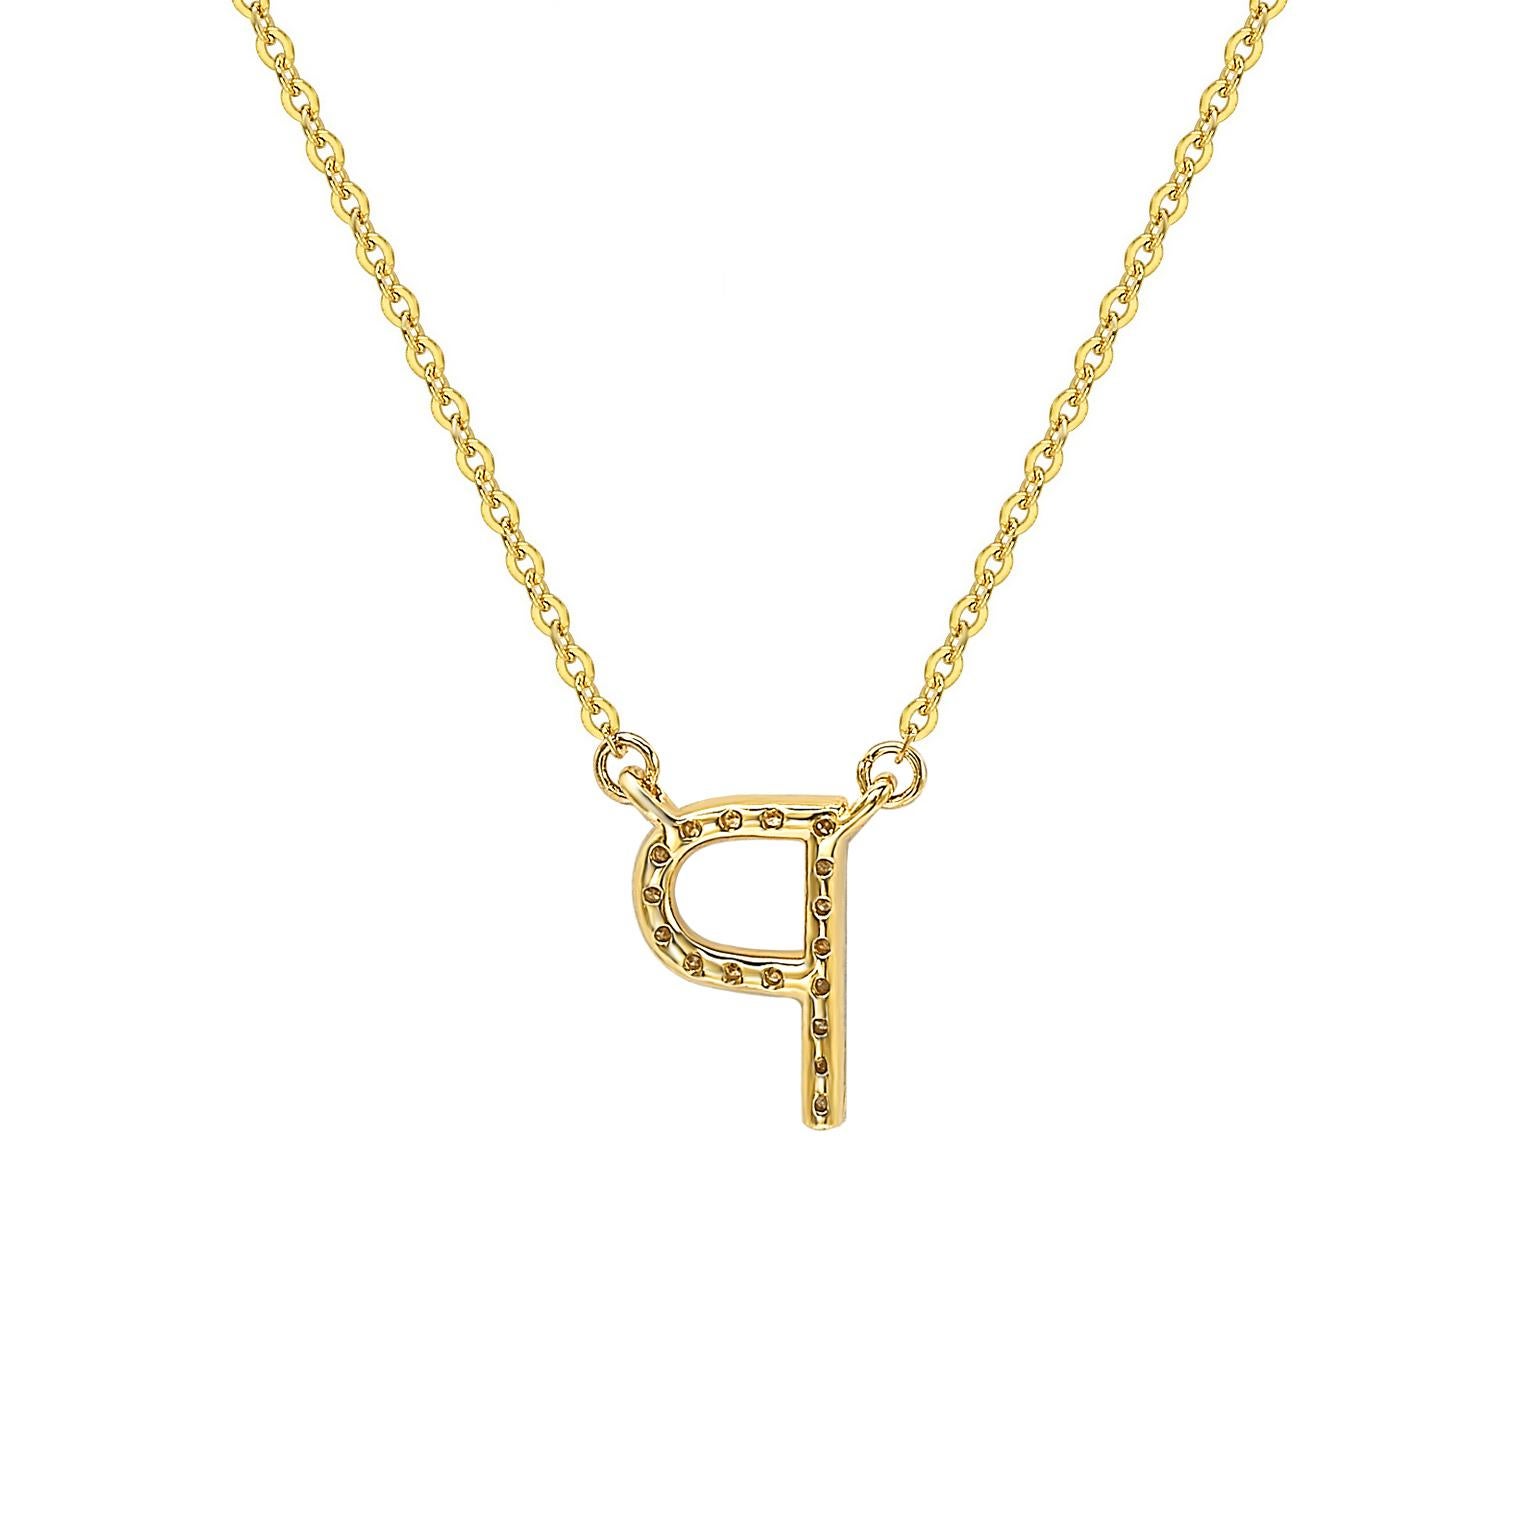 This breathtaking personalized Suzy Levian letter necklace features natural diamonds, hand-set in 14-Karat yellow gold. It's the perfect individualized gift to let someone special know you're thinking of them. Each letter necklace features a row of